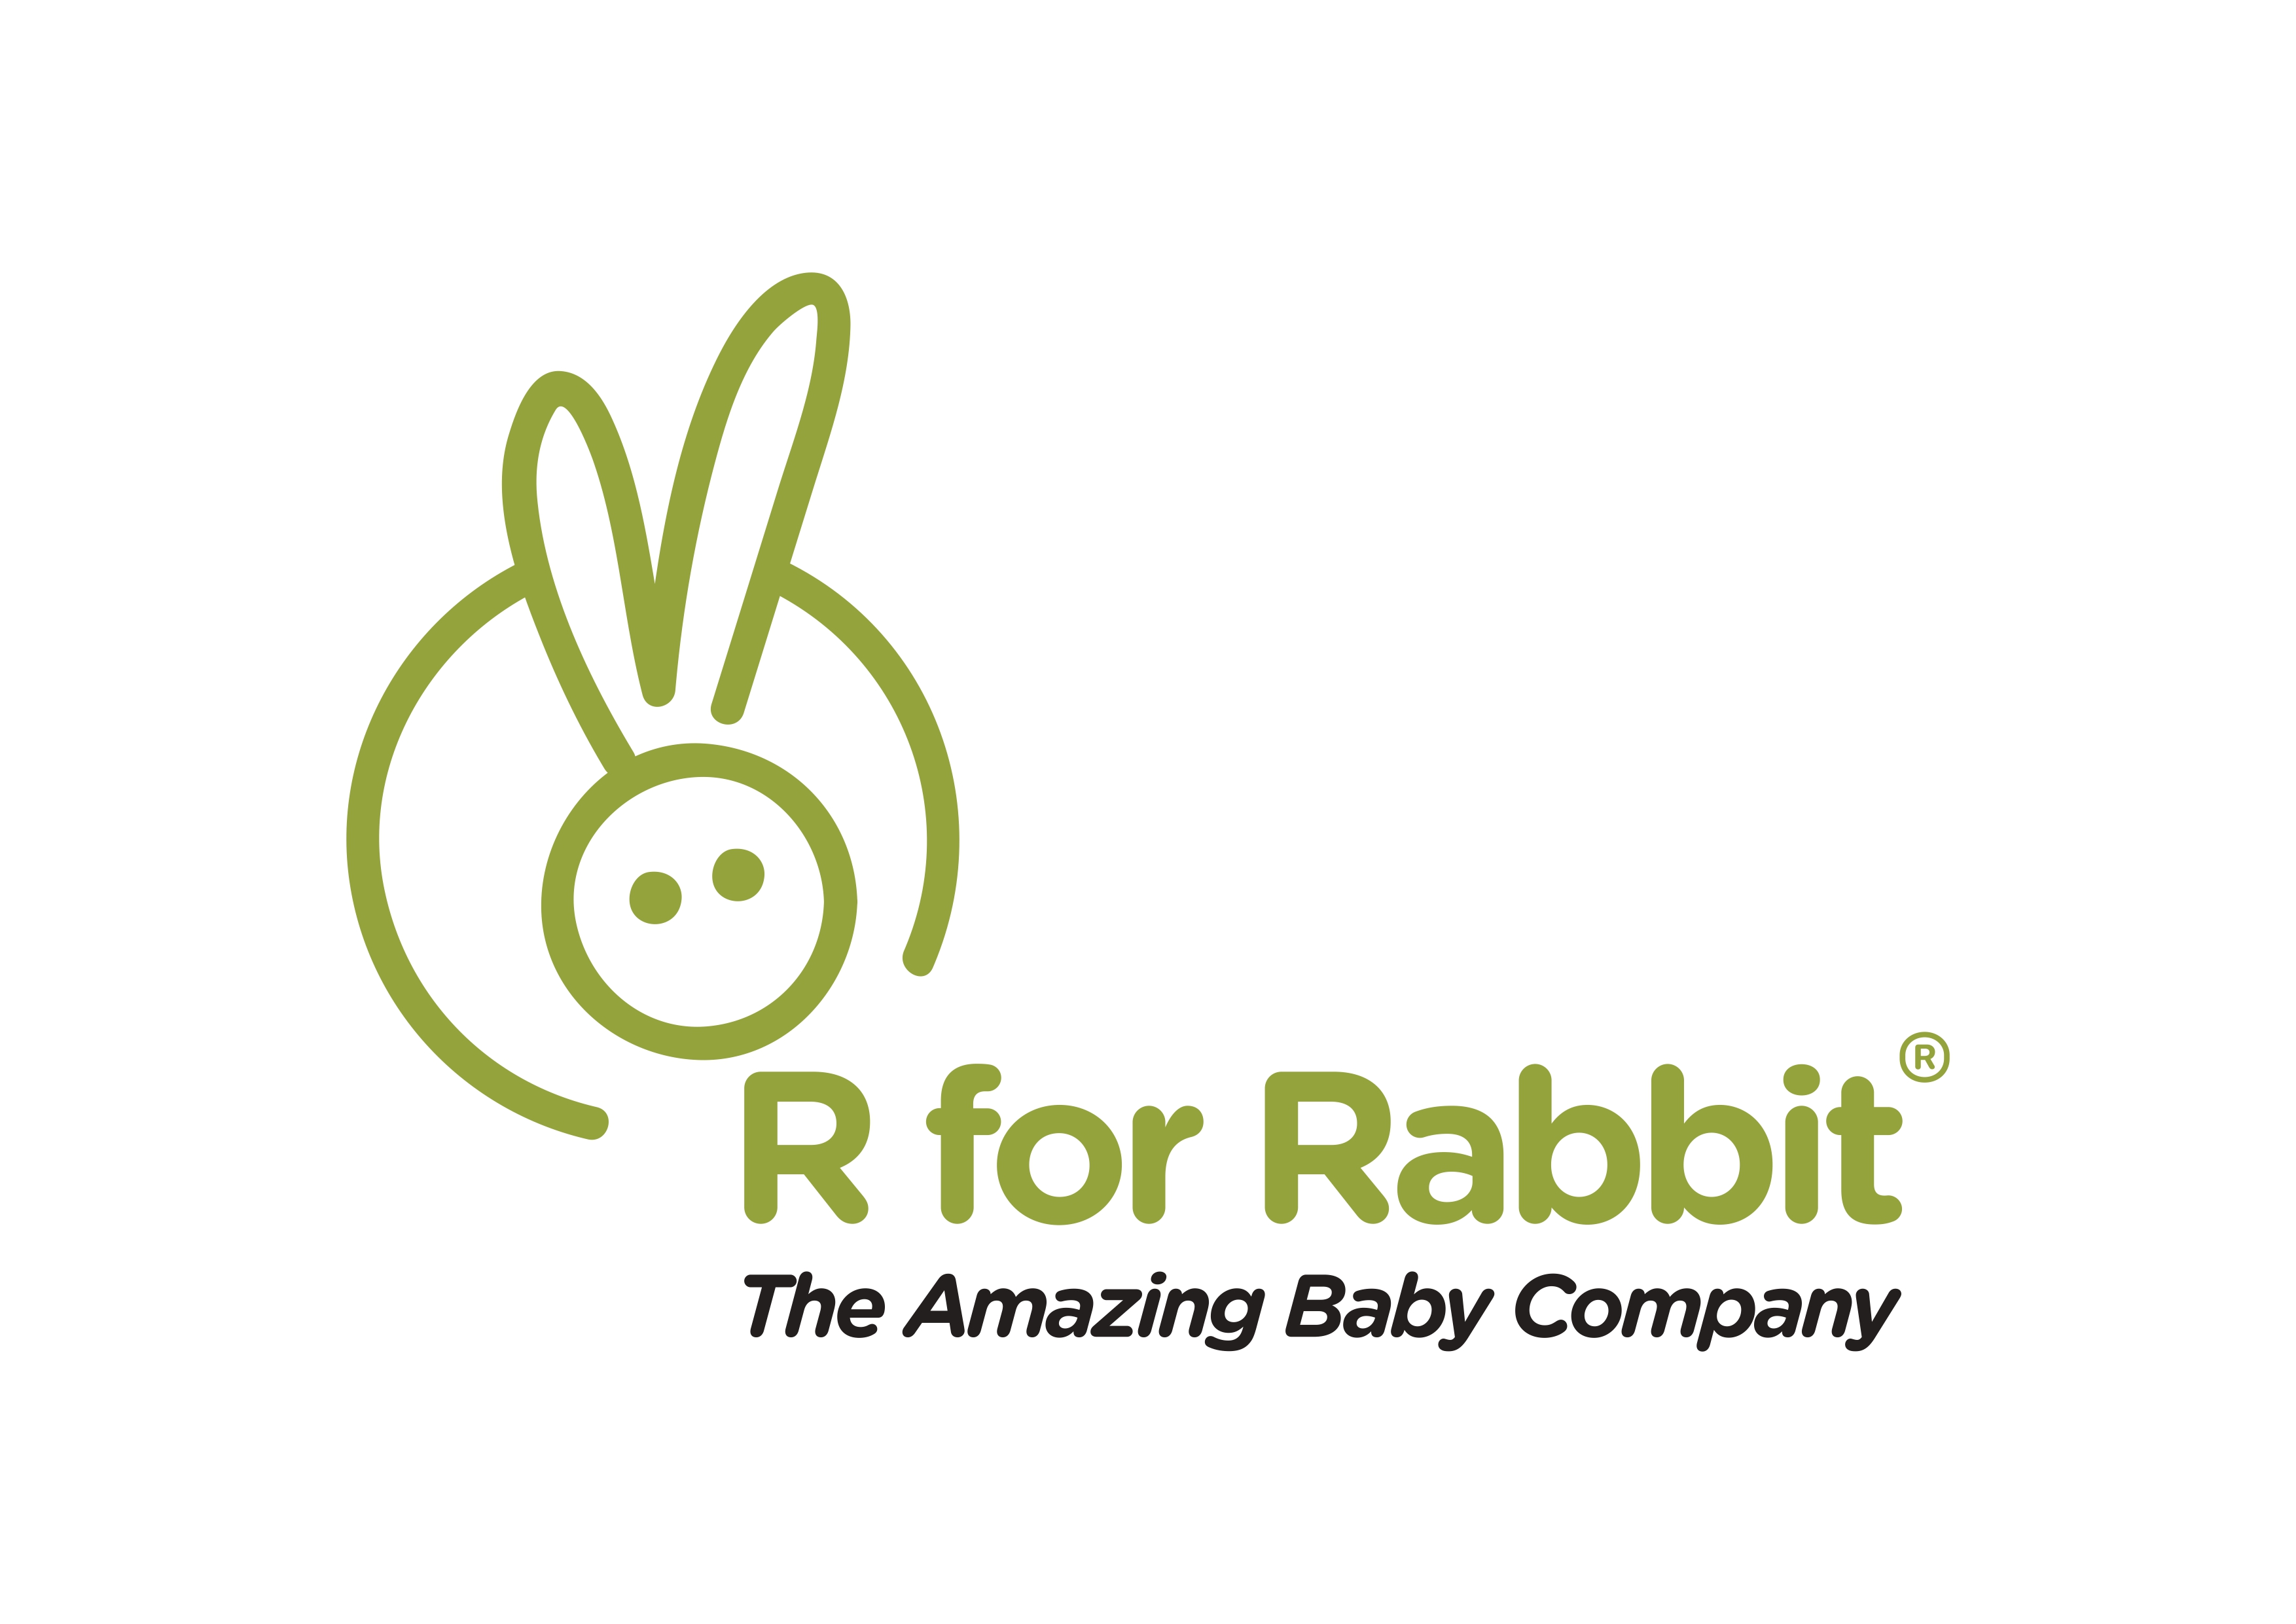 R for Rabbit Baby